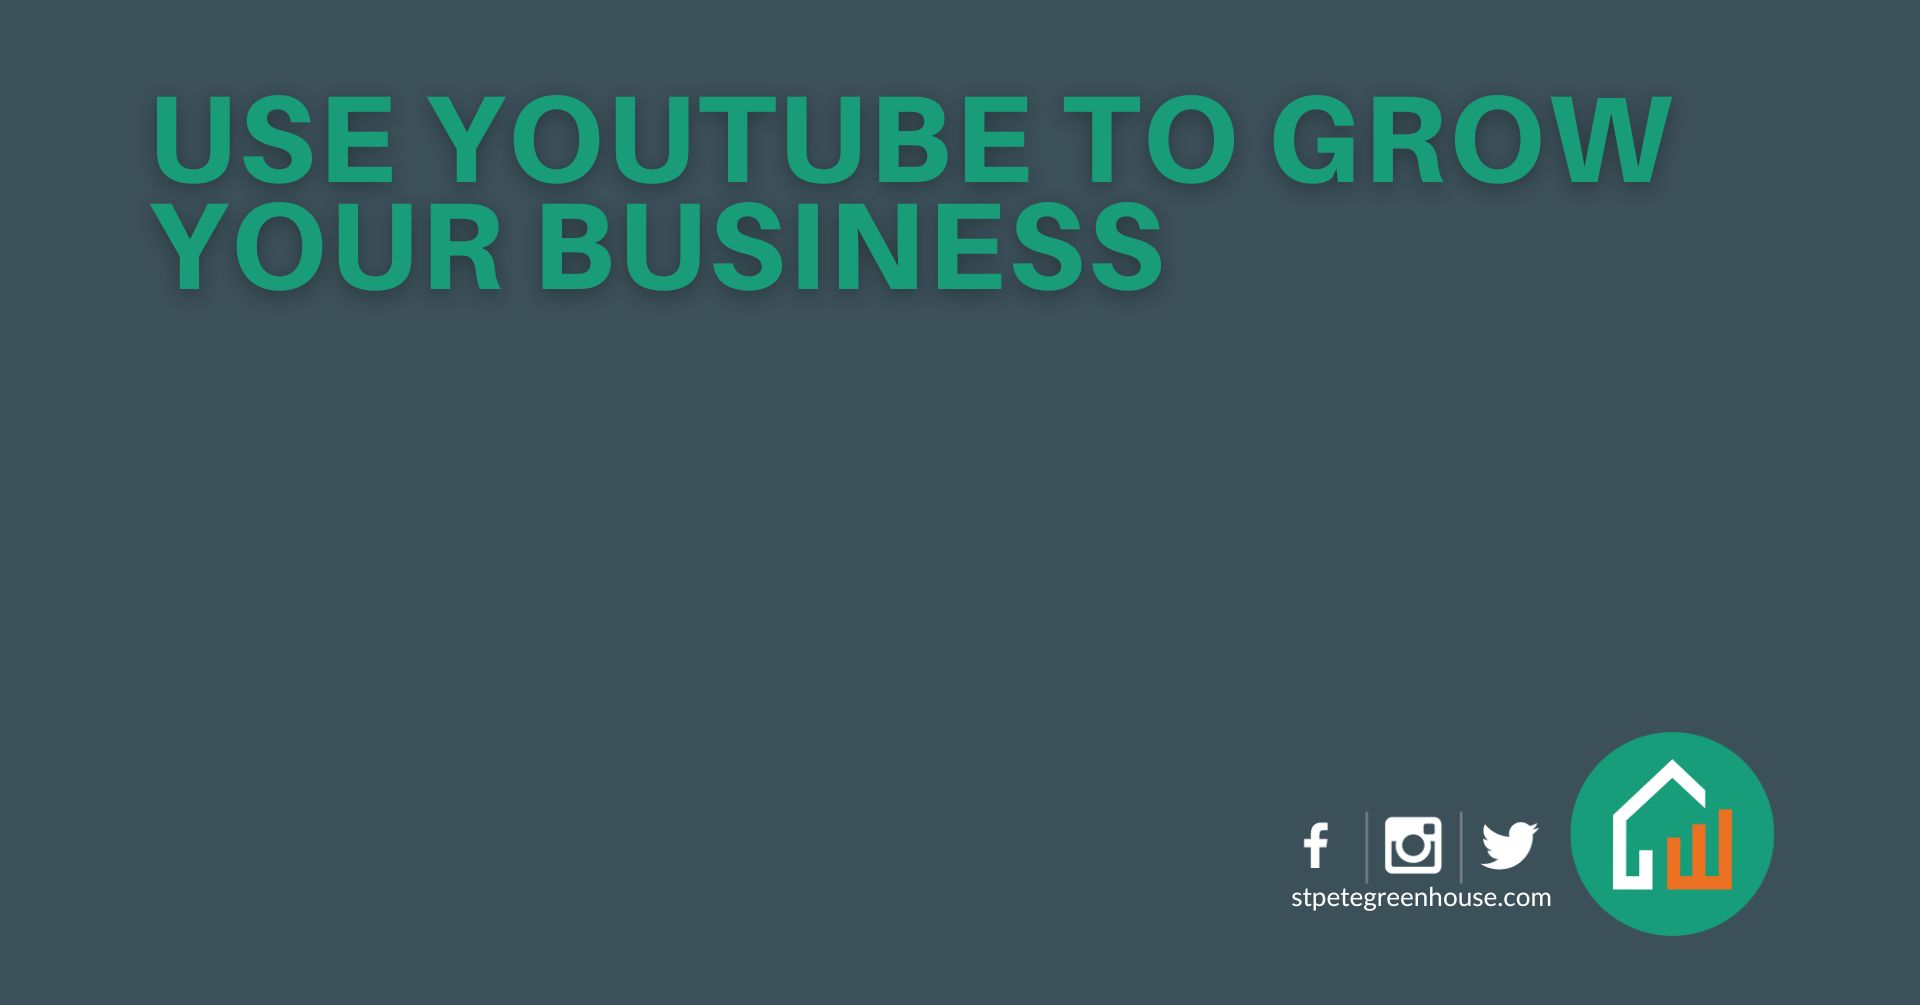 Use YouTube to Grow Your Business-image